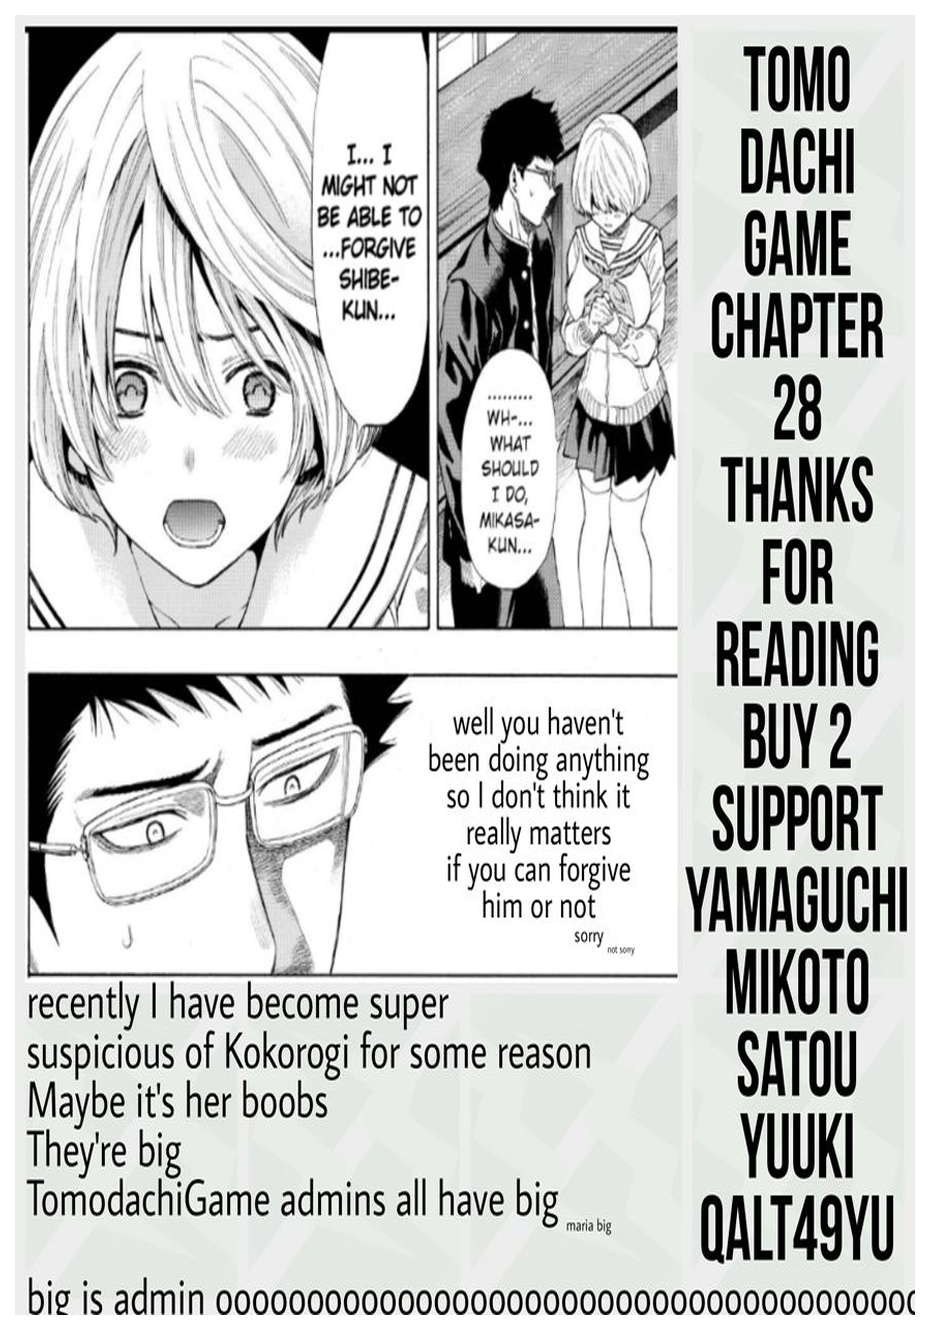 Tomodachi Game Chapter 29